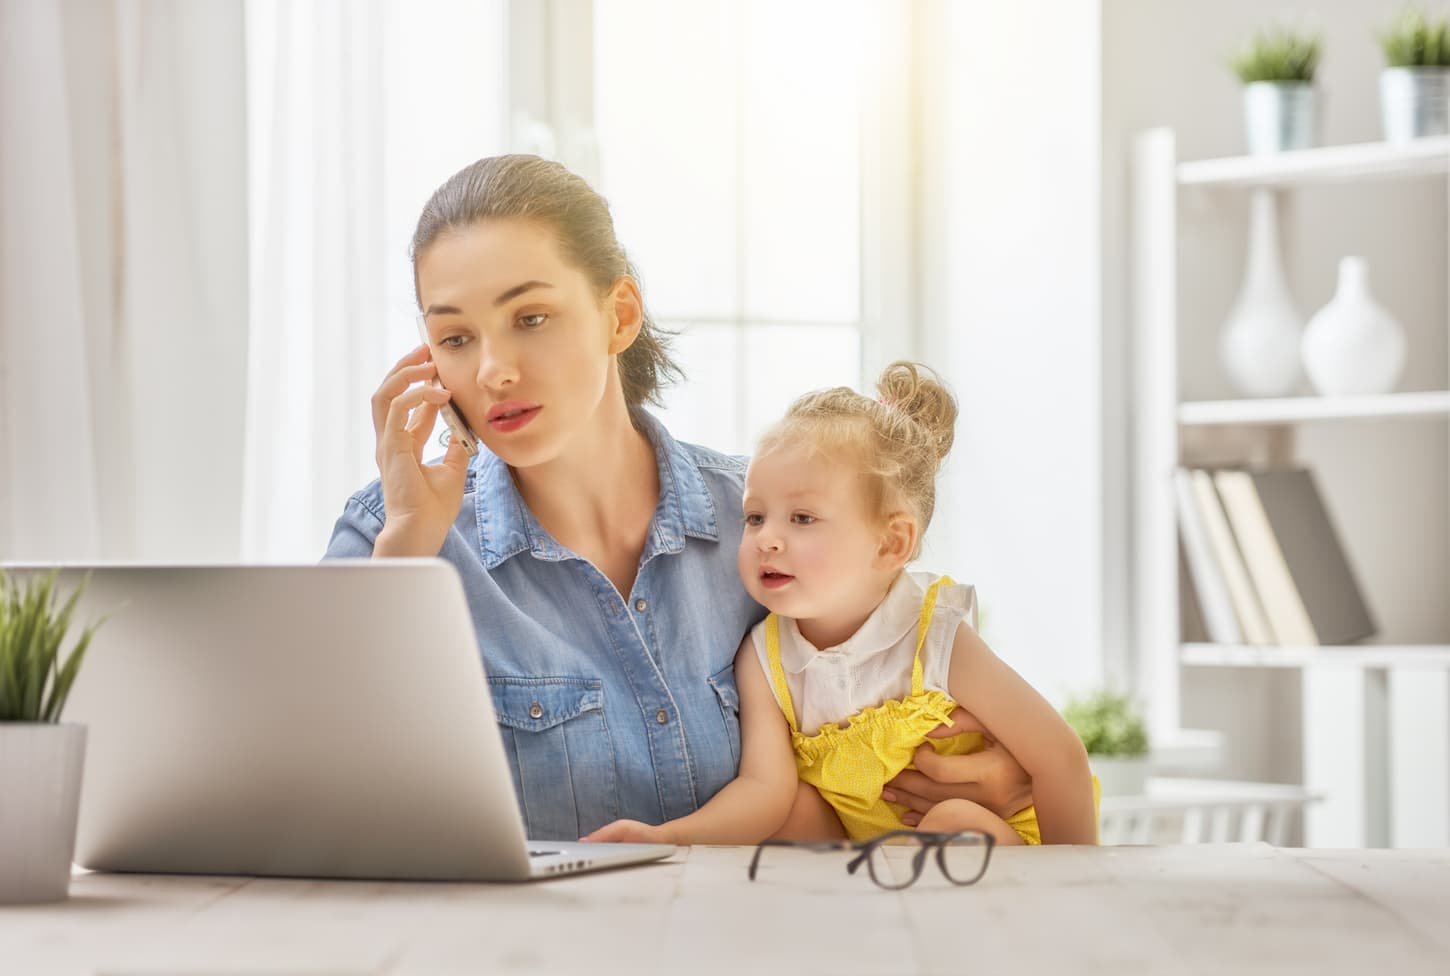 An image of a mother talking with someone over the phone while looking at her working laptop and holding her adorable daughter in another hand.